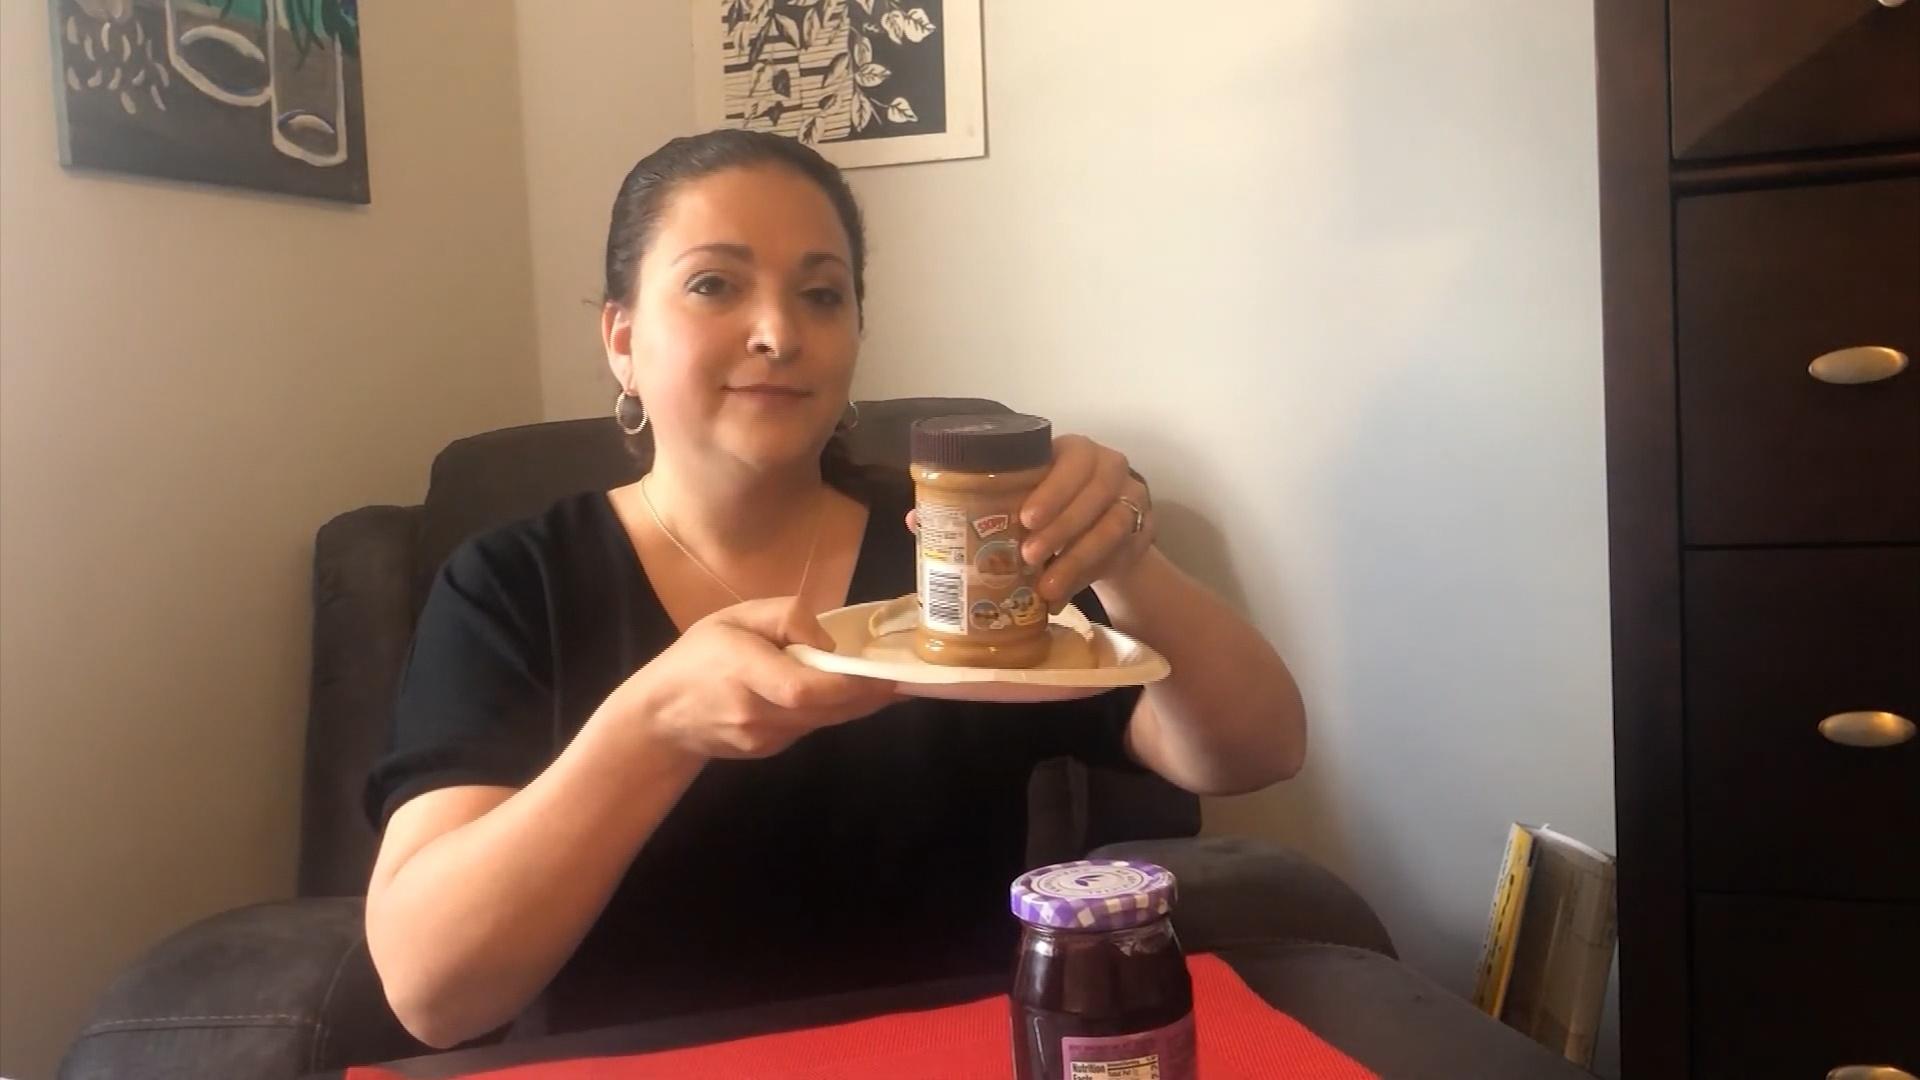 A woman holding a jar of peanut butter on a plate.